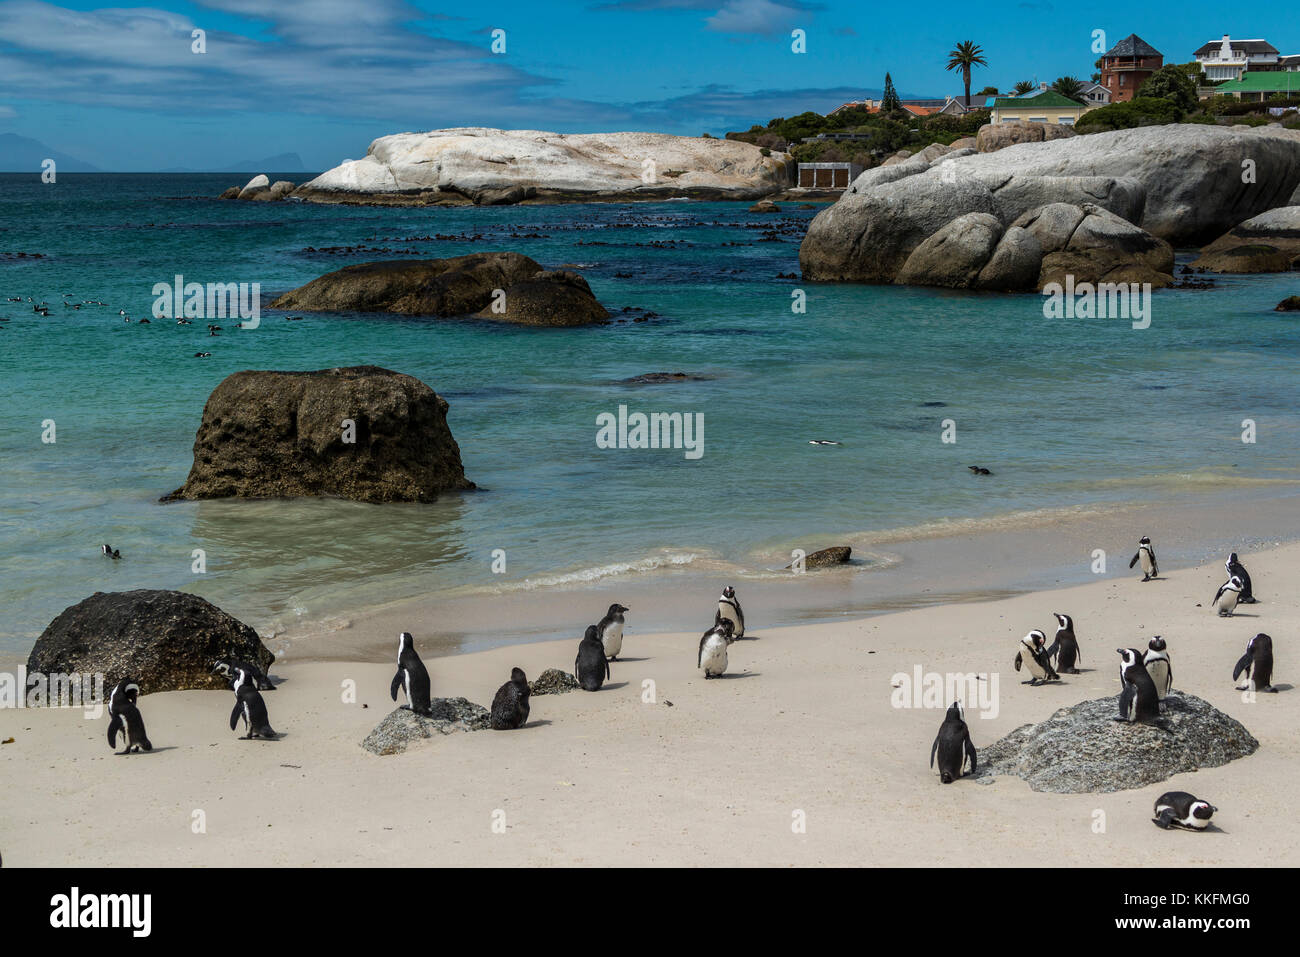 Colony of spectacle penguins, Boulders Beach, Simon's Town, South Africa Stock Photo